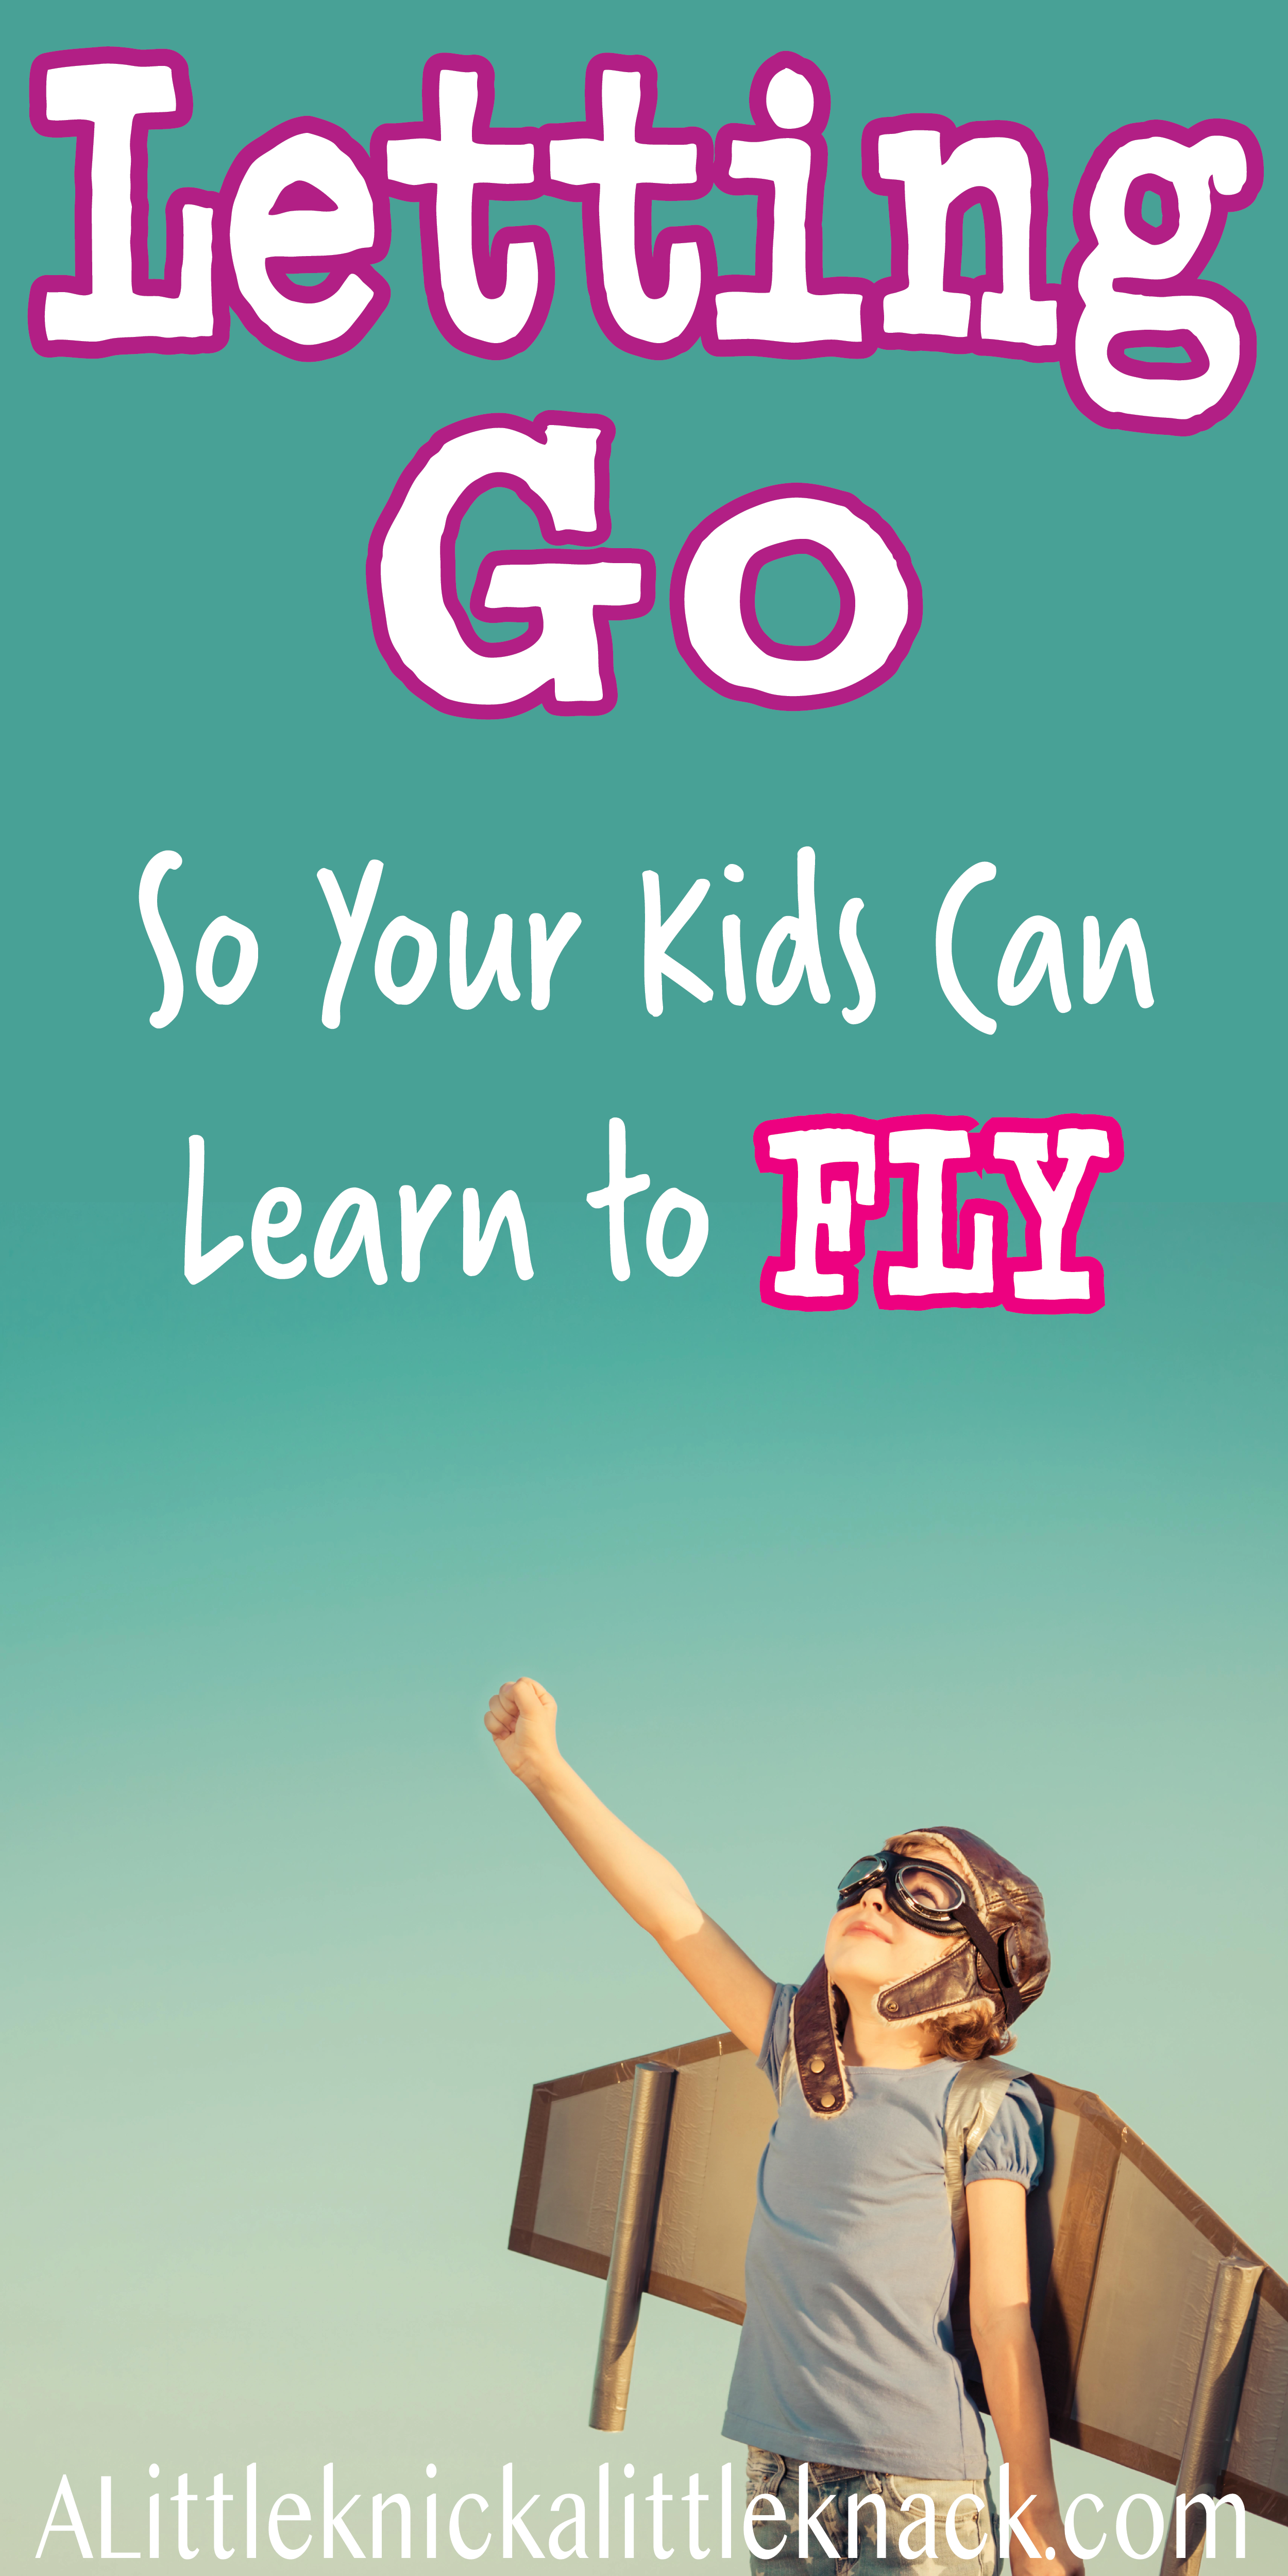 Child with cardboard wings reaching for the sky with text overlay.